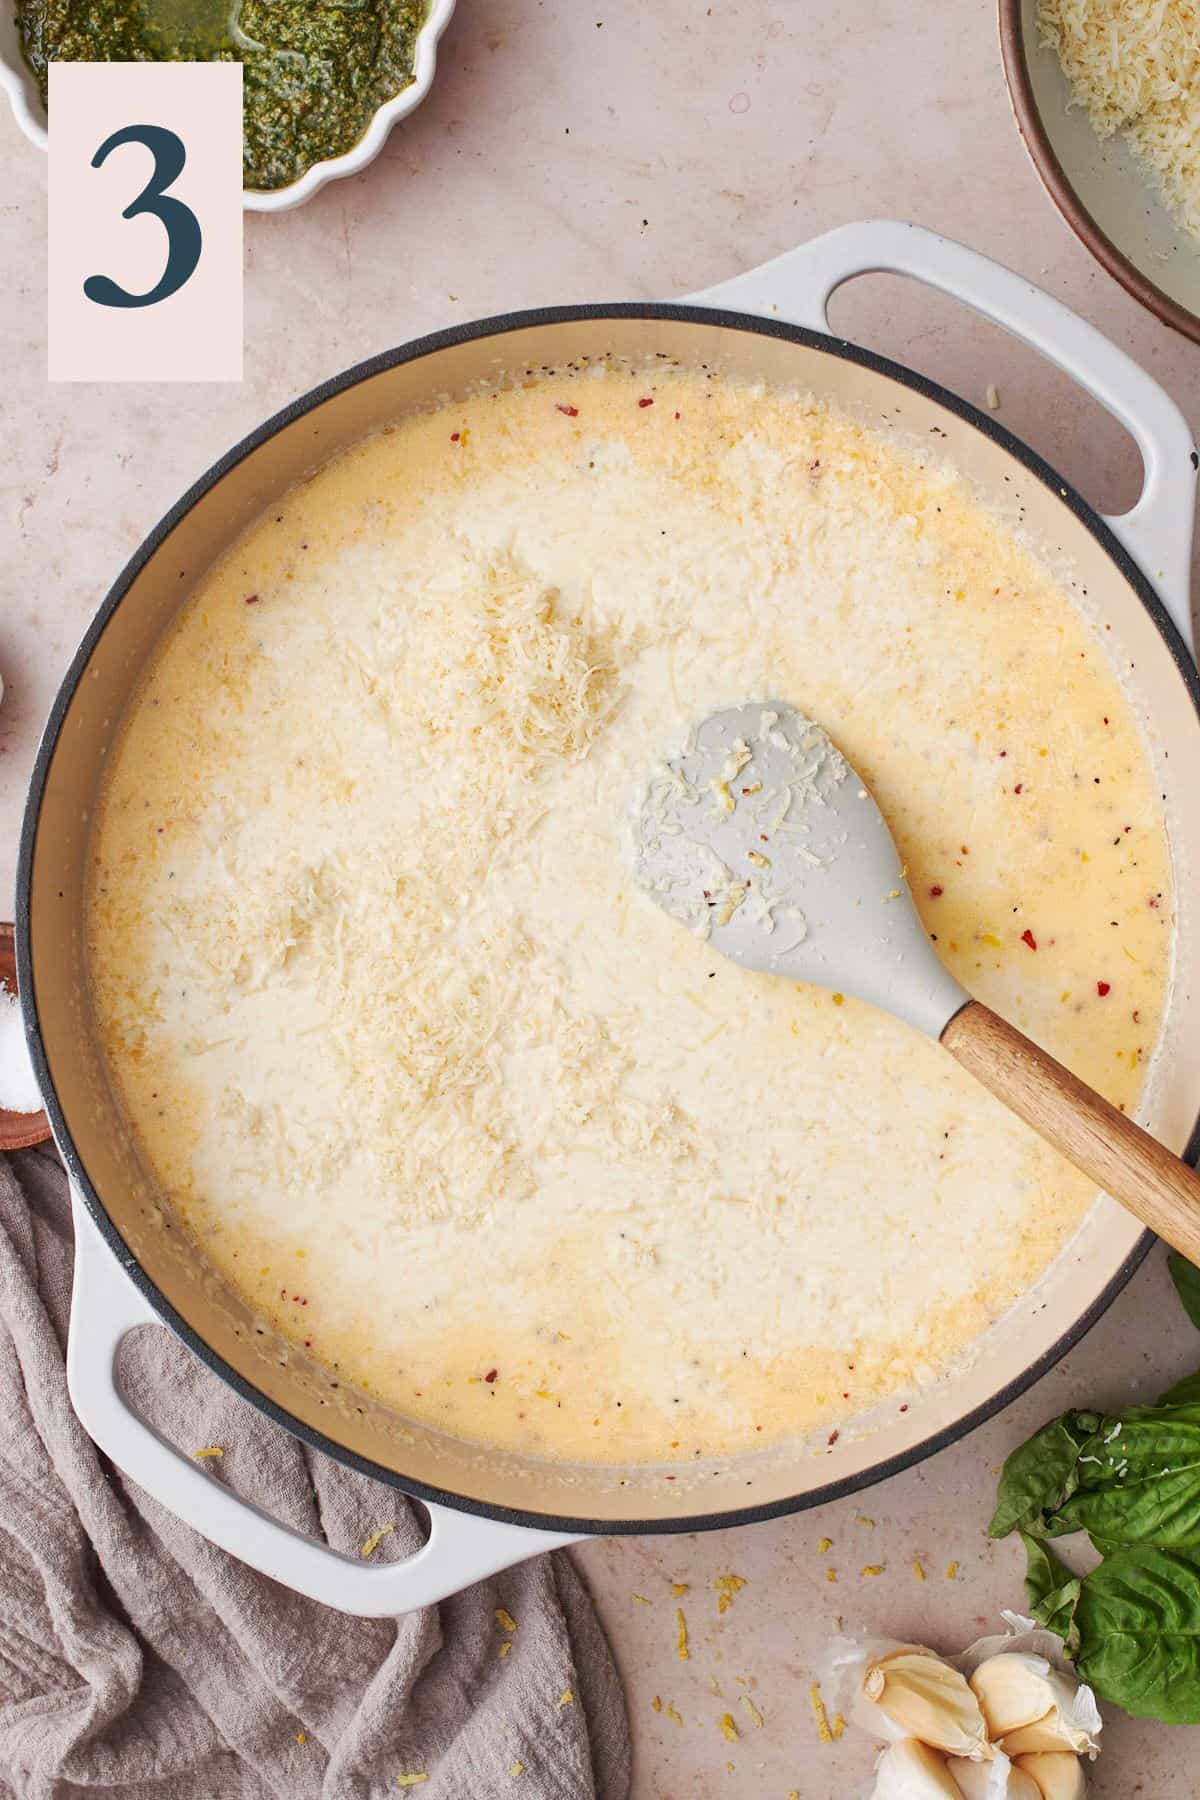 parmesan cheese being added to a cream sauce in a skillet. 